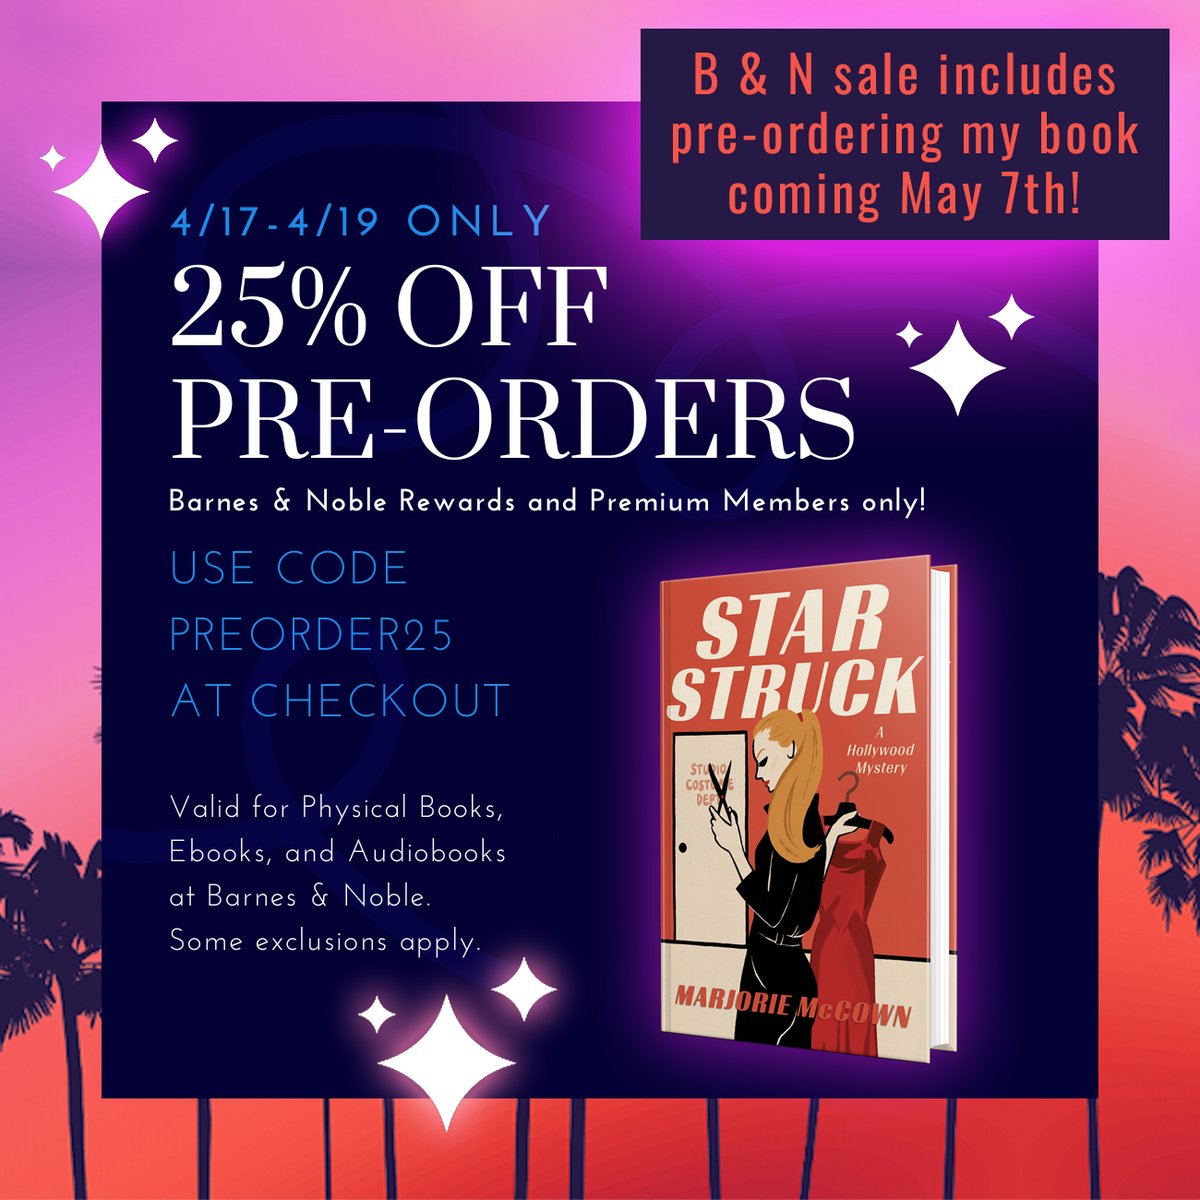 Pre-order sale! Here’s a great chance to save on your copy of STAR STRUCK delivered to your doorstep May 7th. Not a Barnes and Noble member? You can sign up for free at checkout and get 25% off all book preorders. #hollywoodmystery @crookedlanebks @HWPR_LA @tmargaritaplum